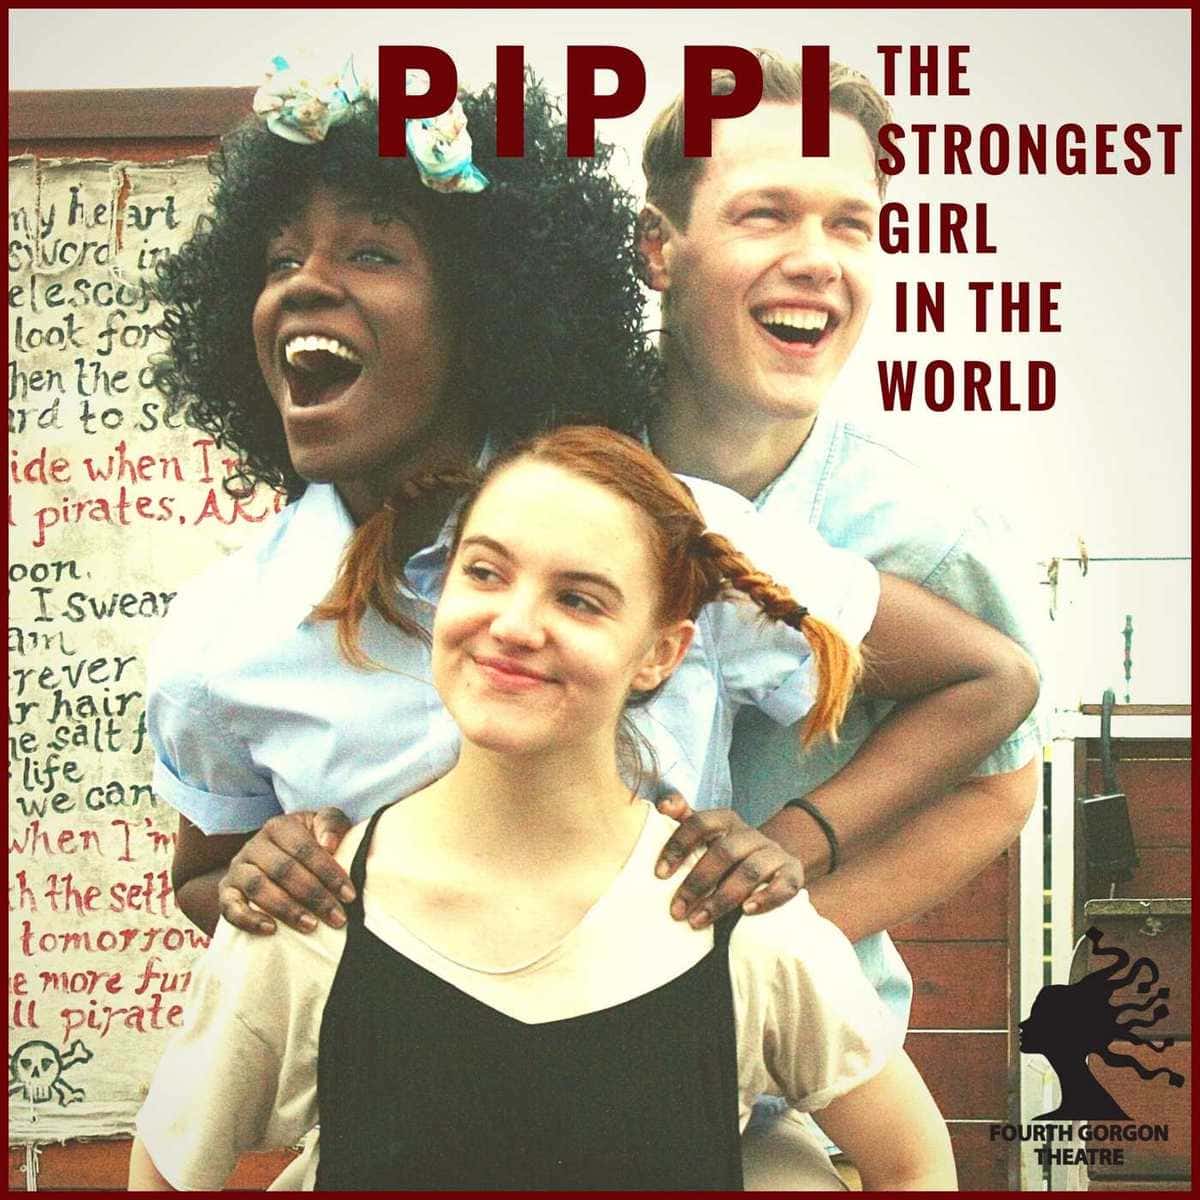 promotional image for Pippi: The Strongest Girl in the World children's musical at Pirate Life